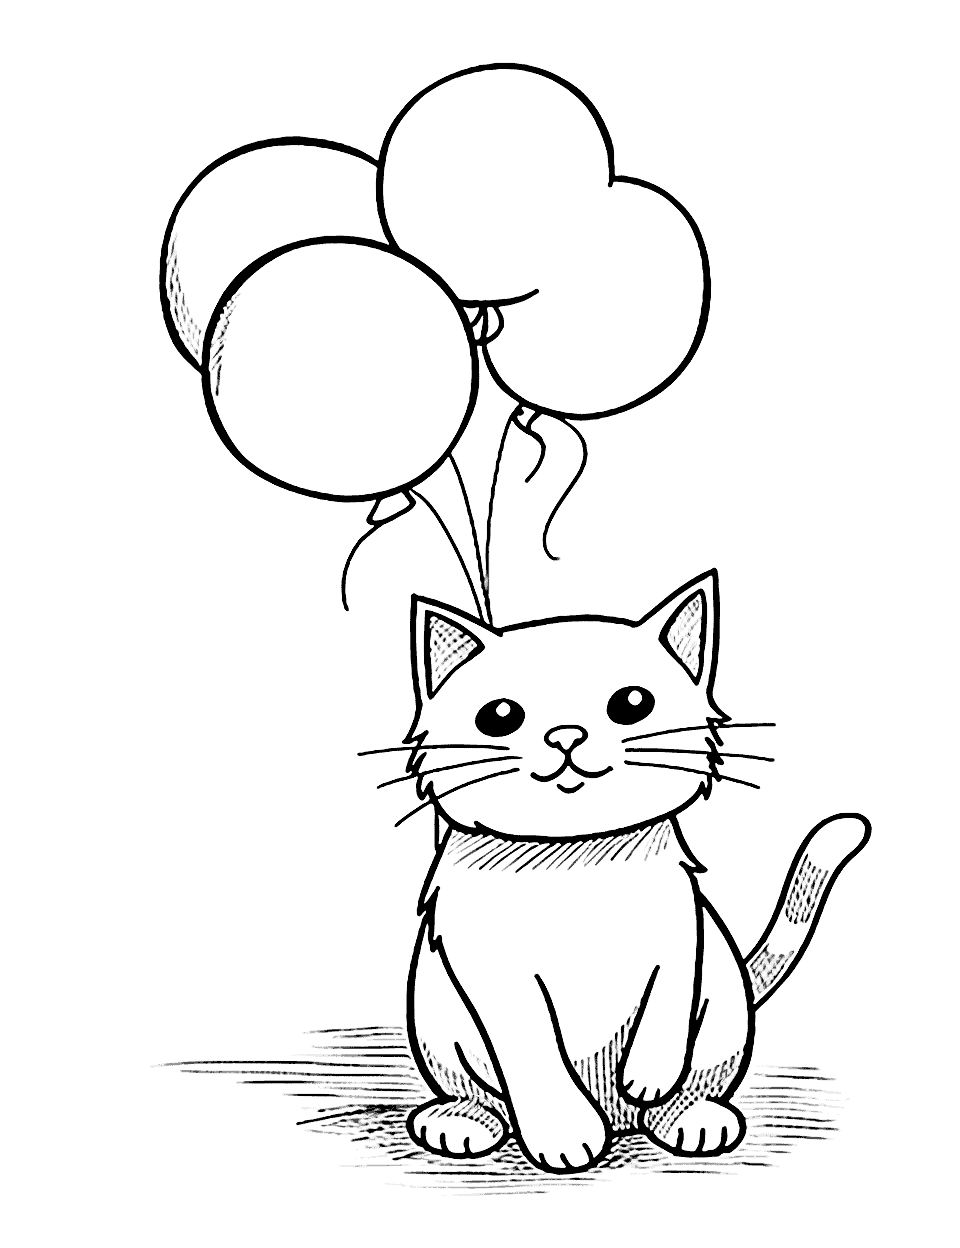 Birthday Cat With Balloons Coloring Page - A cat flying away with a bunch of colorful birthday balloons.